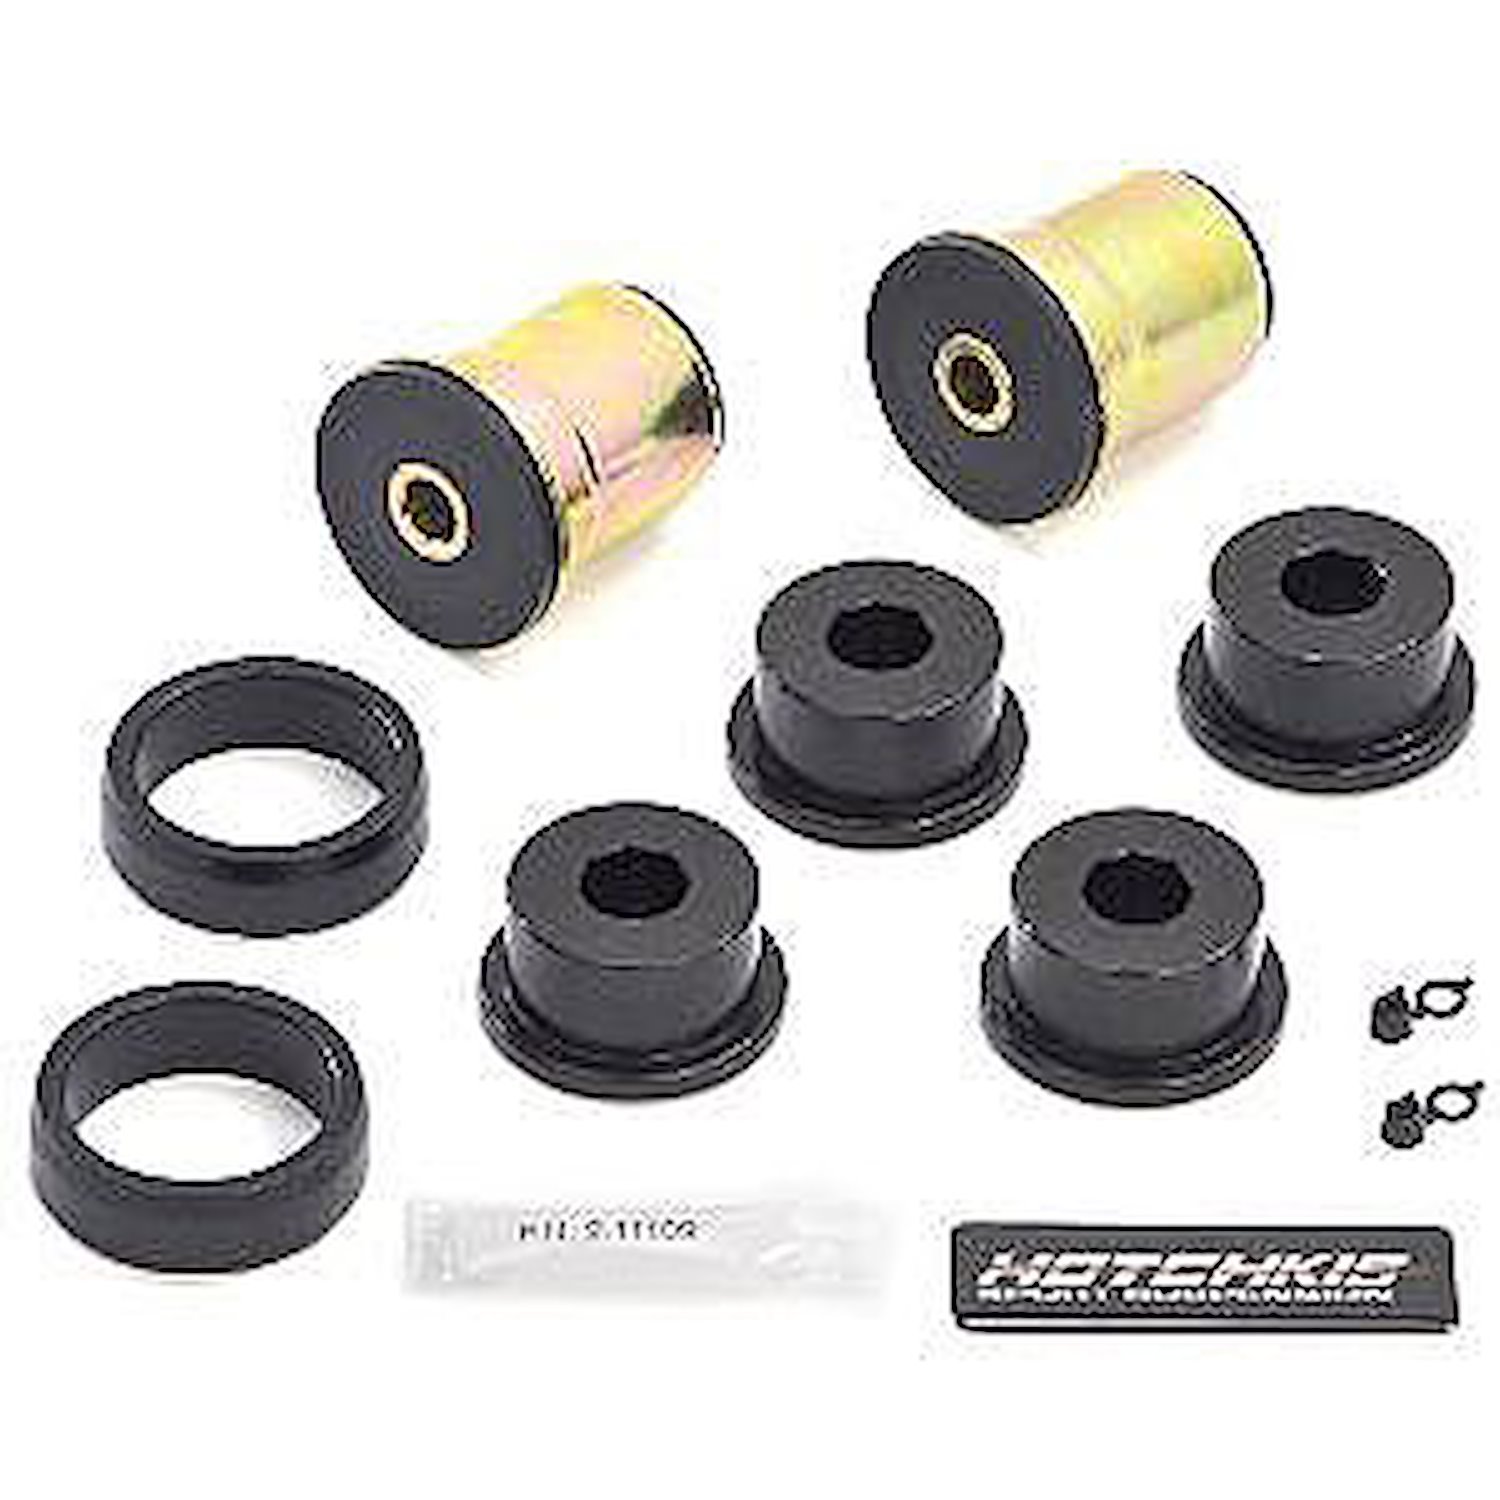 Trailing Arm Bushing Kit For Use With 515-1304, 1304R